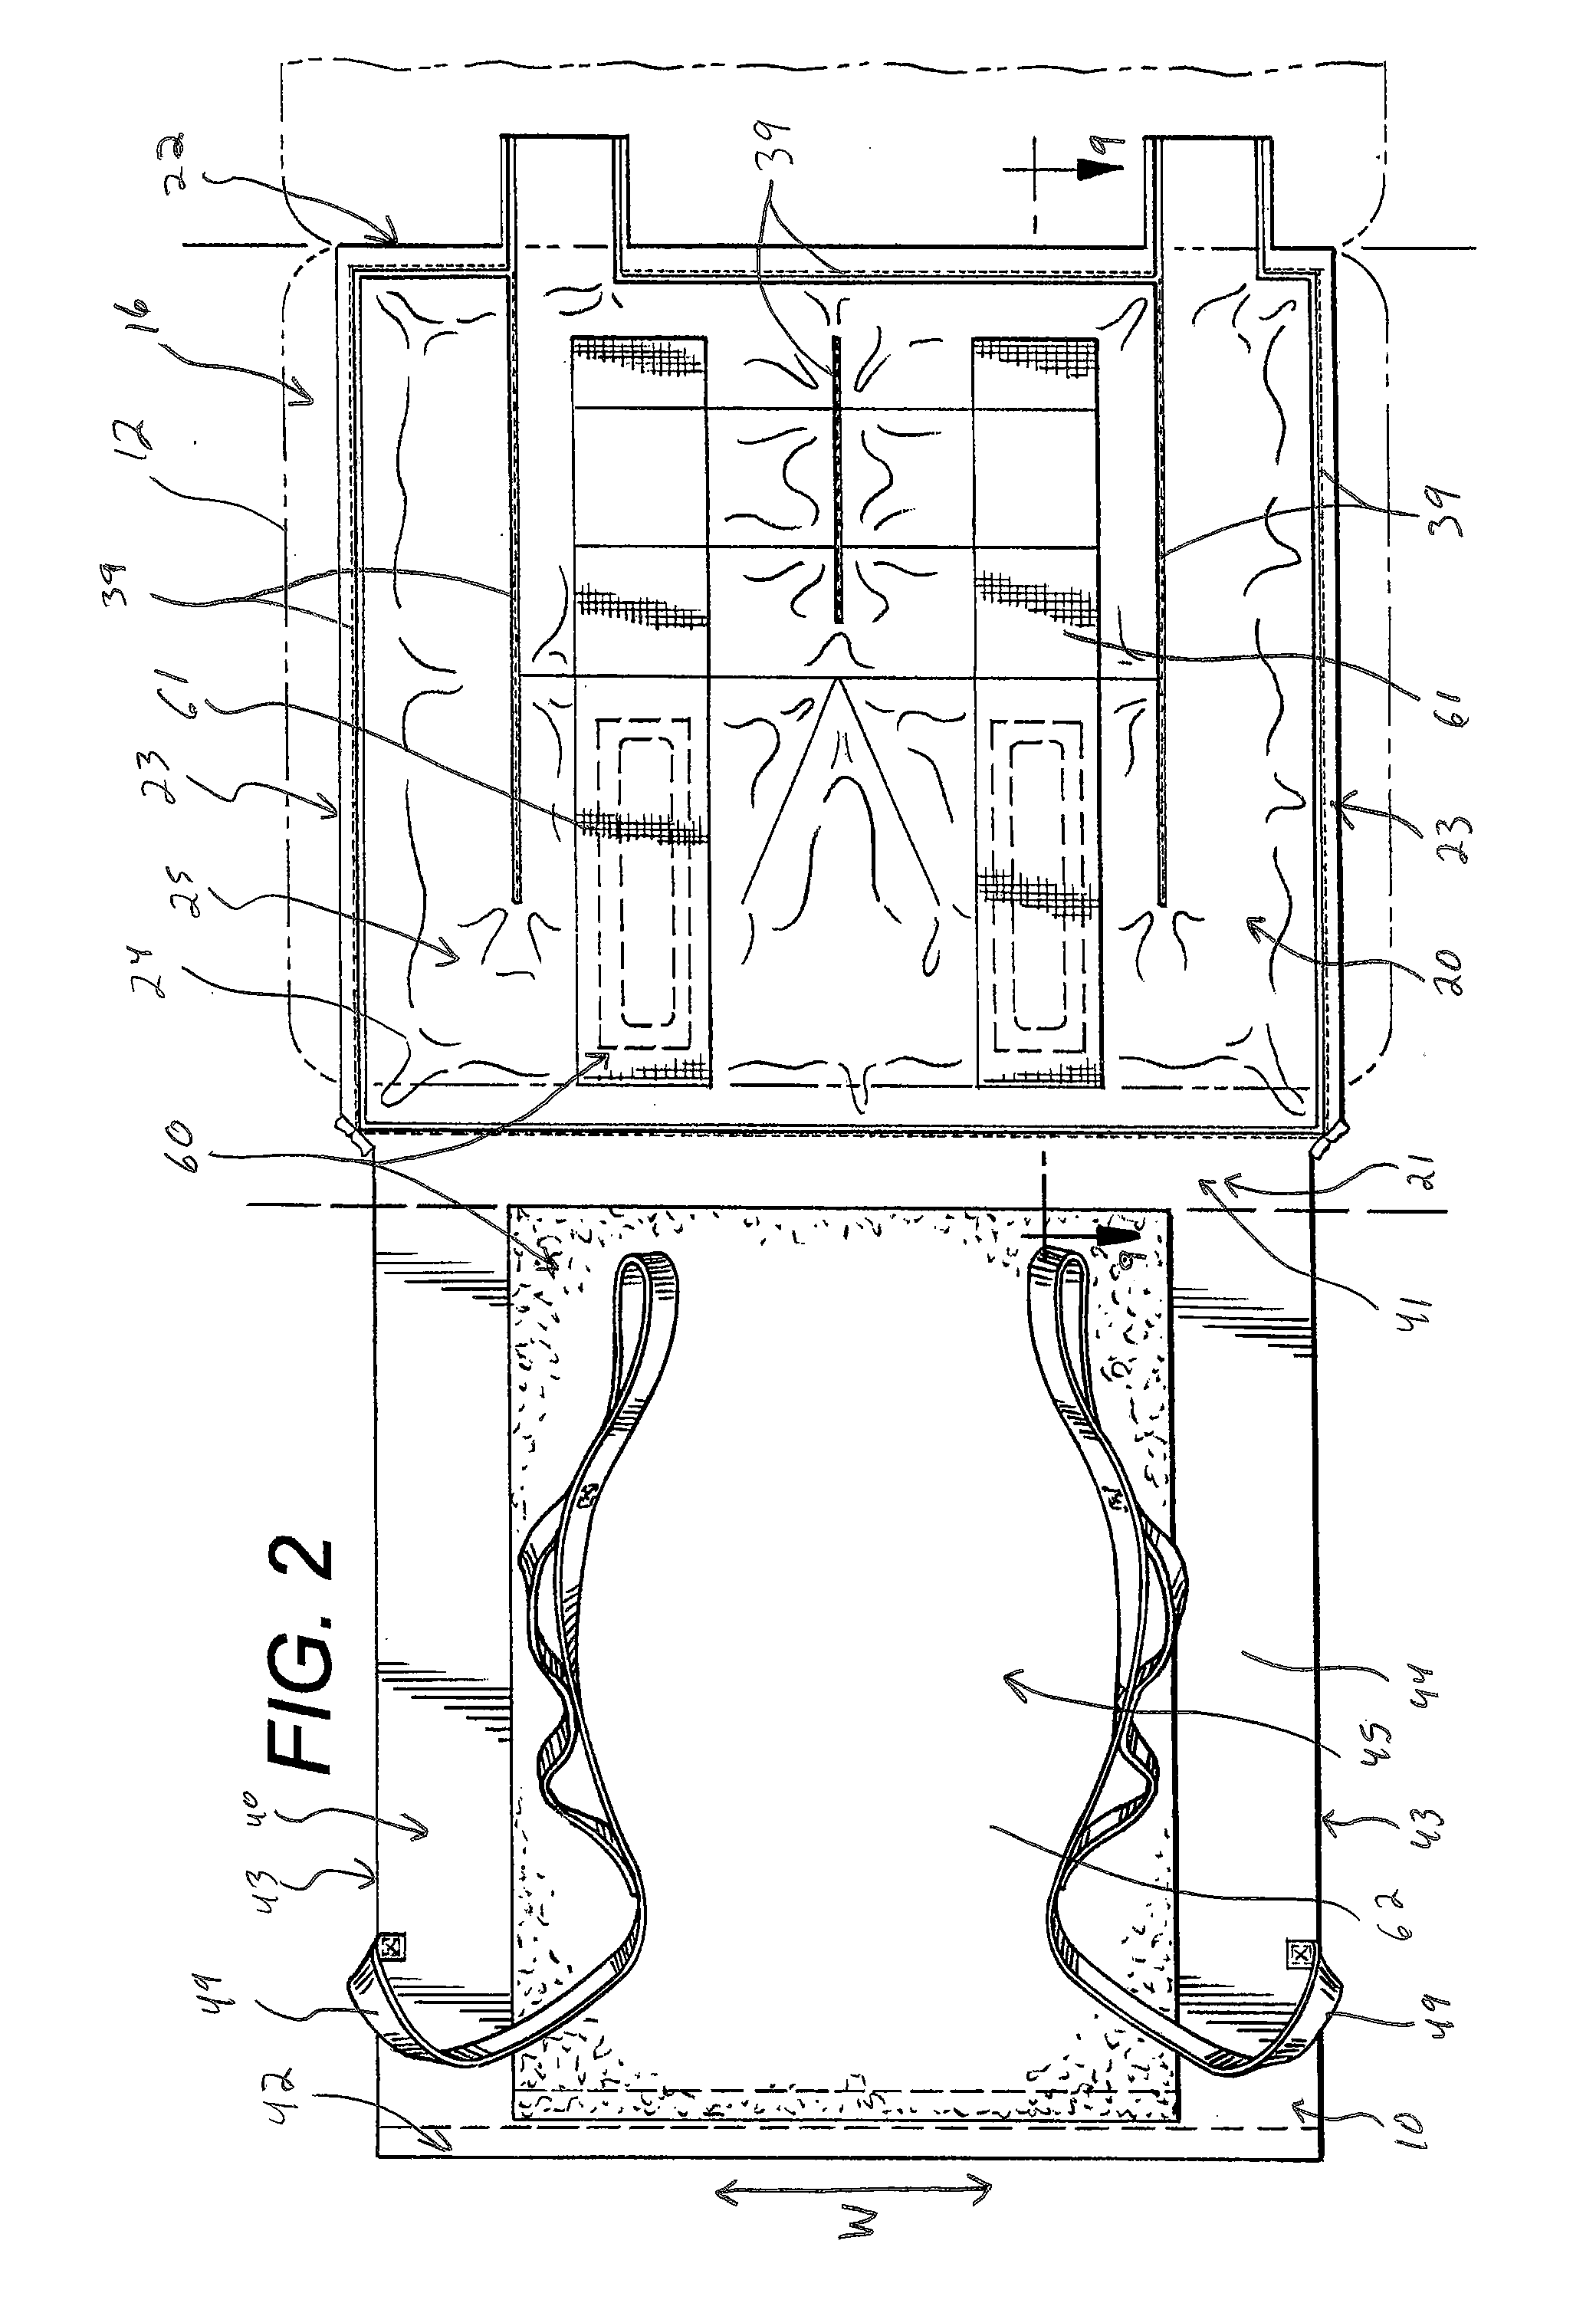 Apparatus and Method for Positioning a Seated Patient